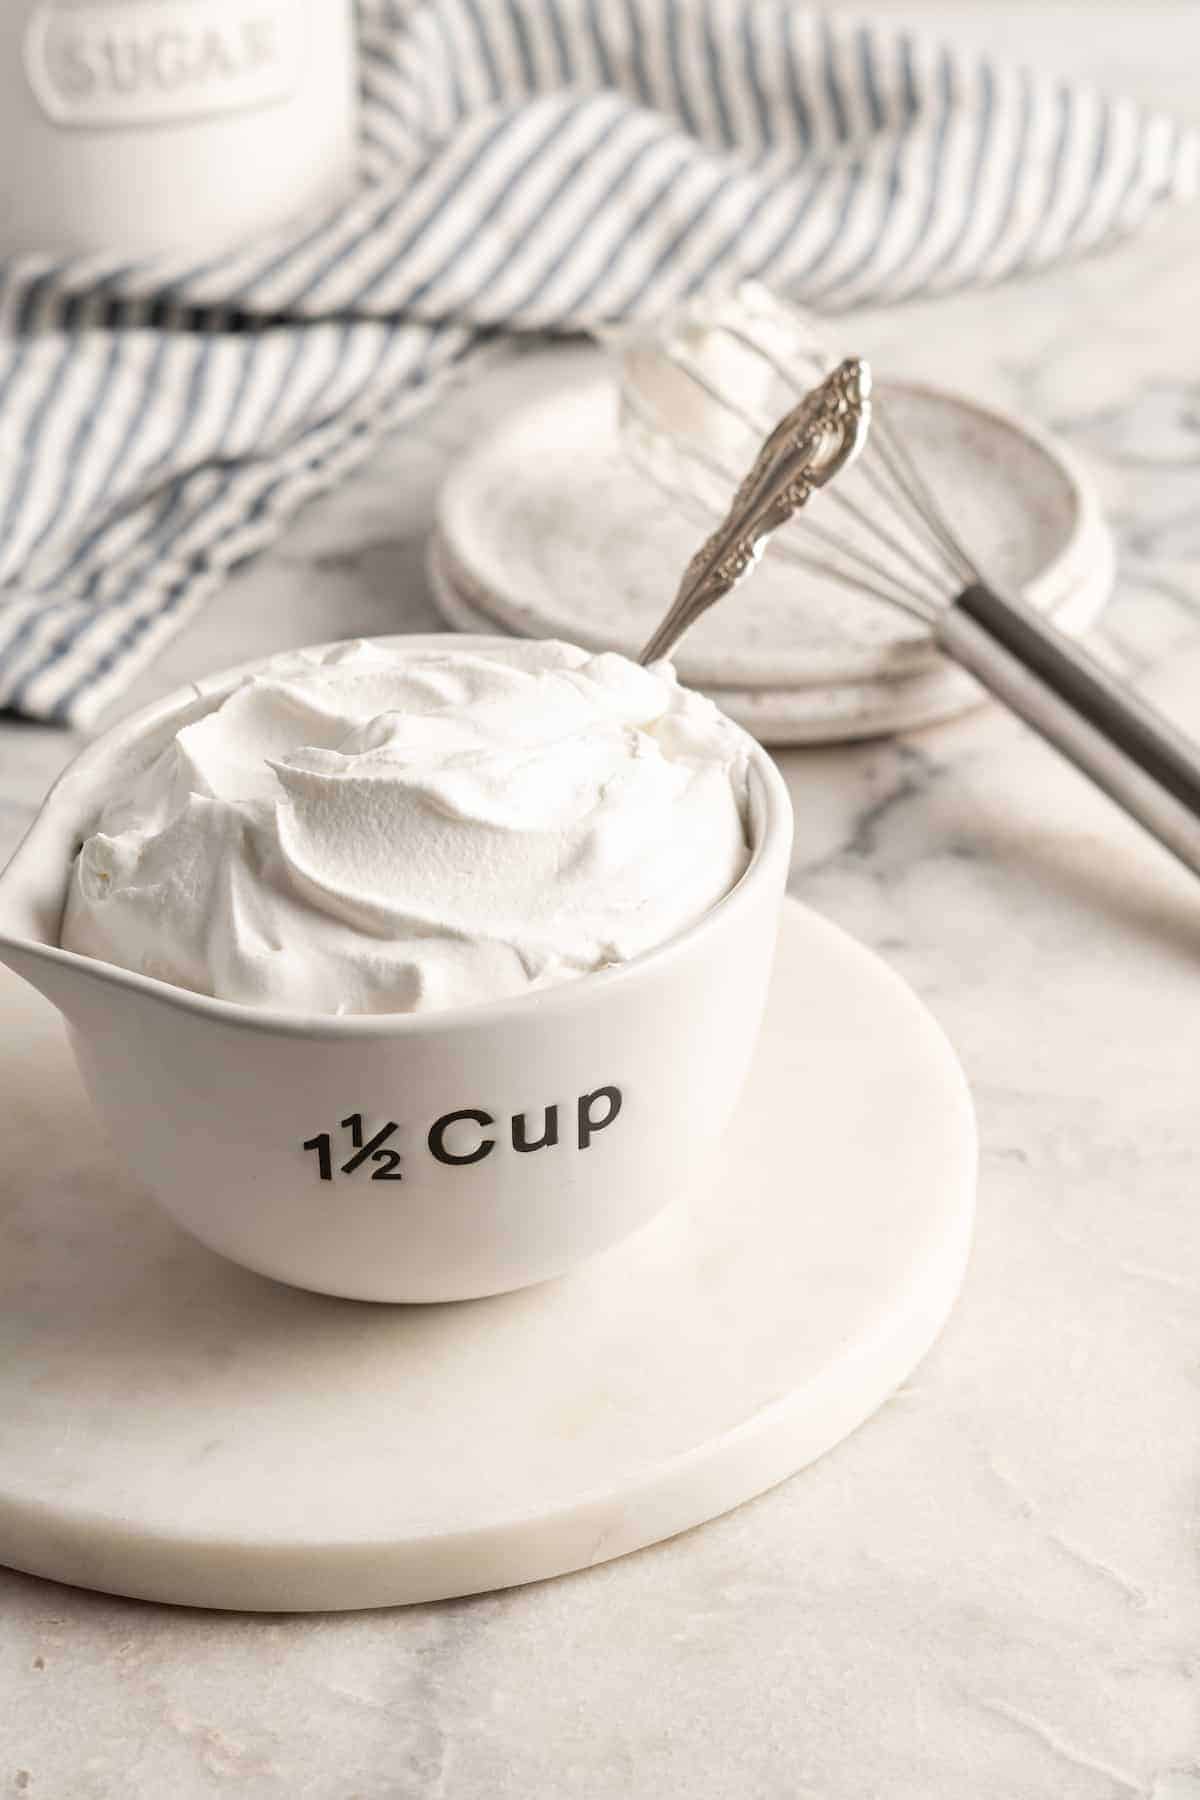 Tips for Whipping Coconut Cream: